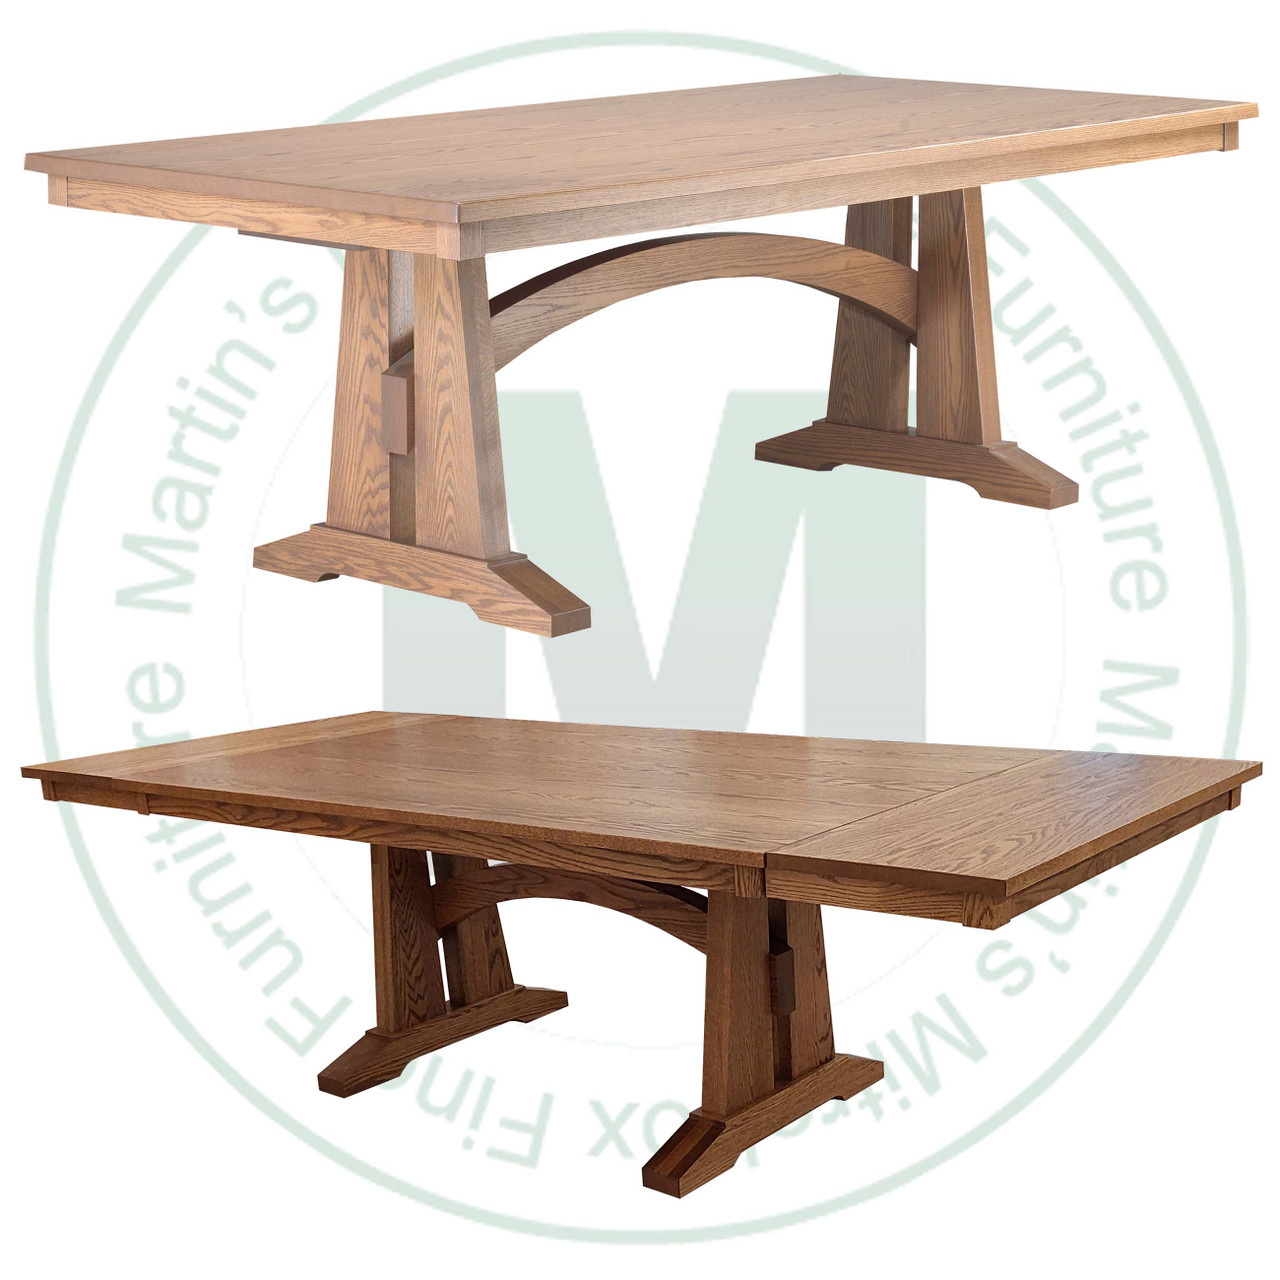 Maple Golden Gate Solid Top Pedestal Table 42''D x 120''W x 30''H And 2 - 16'' Extensions. Table Has 1.25'' Thick Top